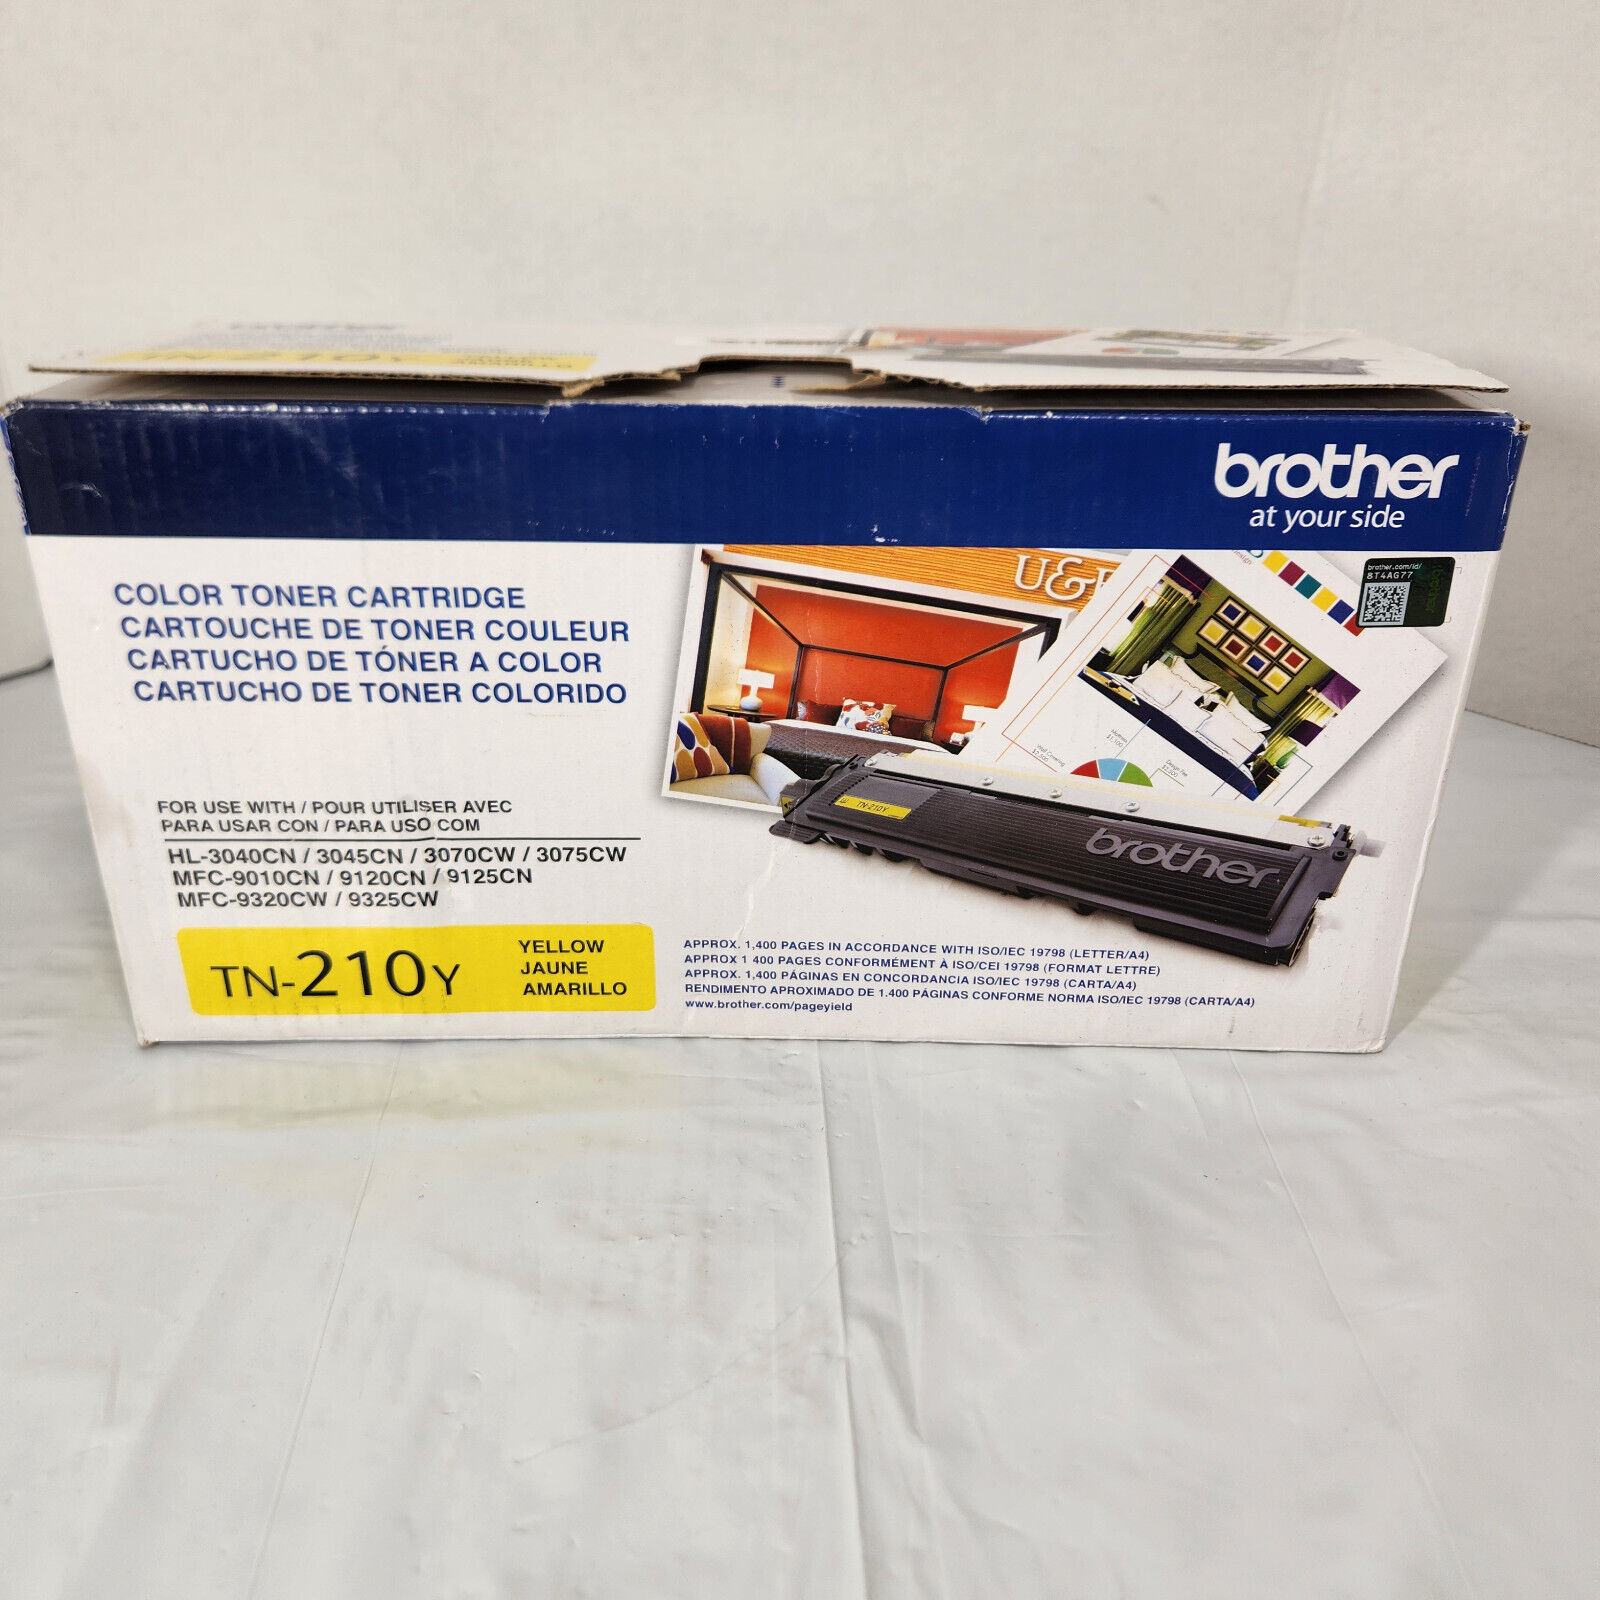 Genuine Brother TN-210Y Toner Cartridge Color Yellow About 1400 Page Yield OEM